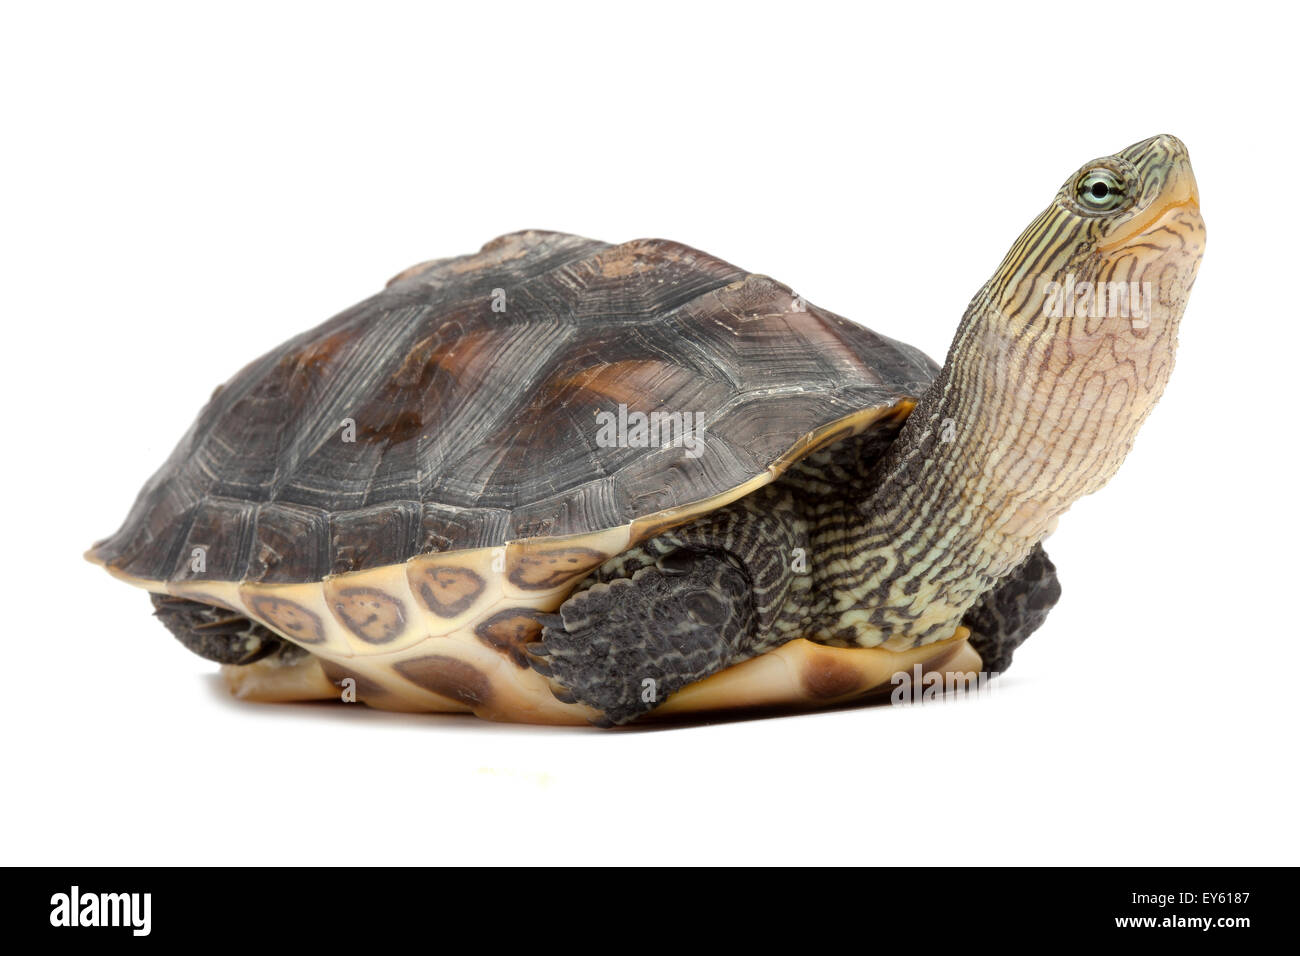 Chinese Striped-necked Turtle on white background Stock Photo